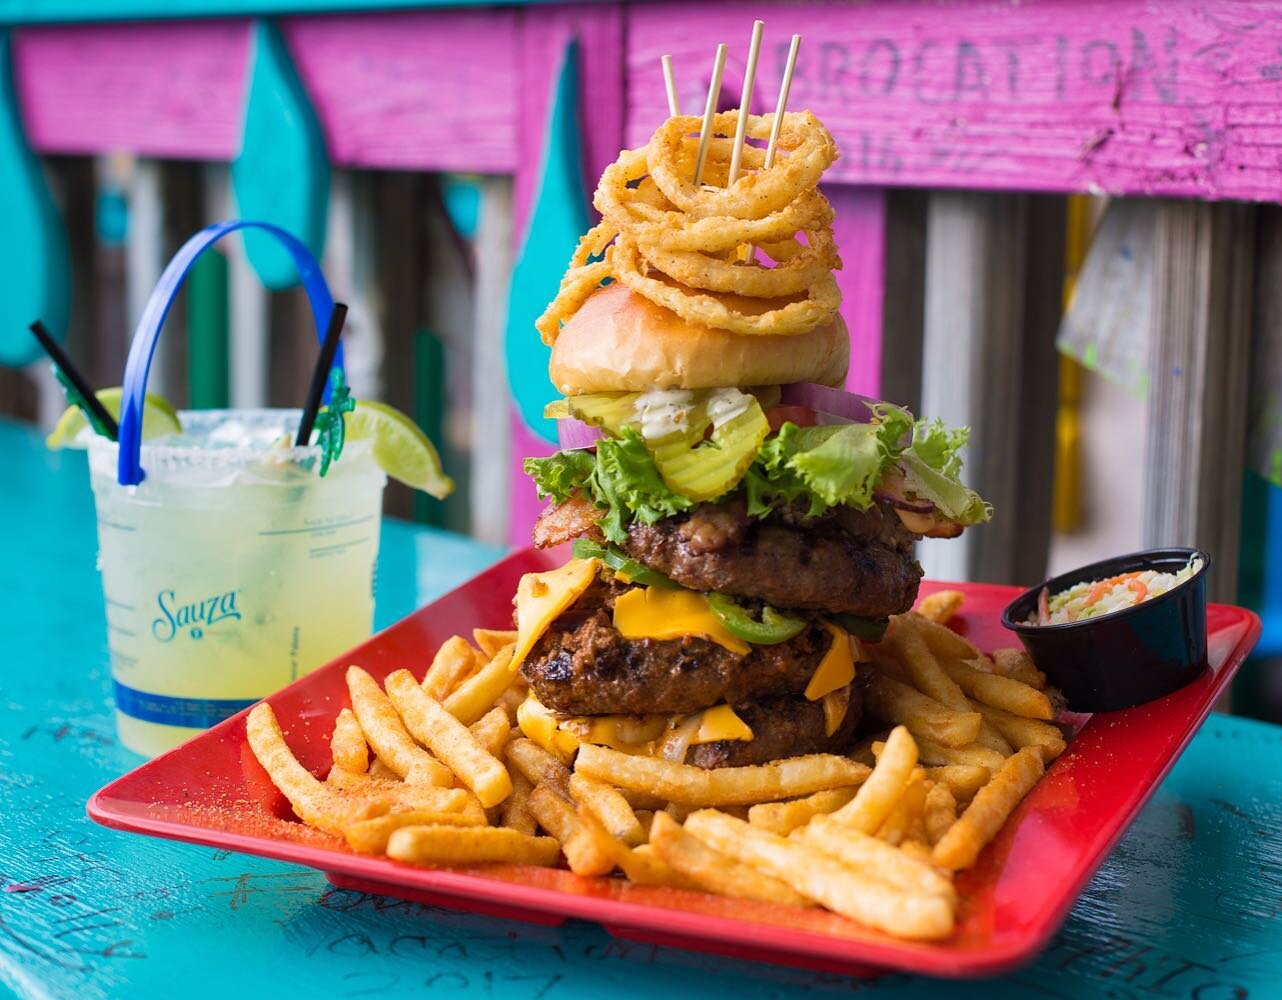 Who here loves a food challenge?! 🍔🙋🏼&zwj;♀️
.
This is the #Fudinator from @fudpuckers and it&rsquo;s their own food challenge. If you can finish this entire plate (fries and all!) in 30 minutes, you&rsquo;ll win a FREE Fud T-Shirt of your choice!